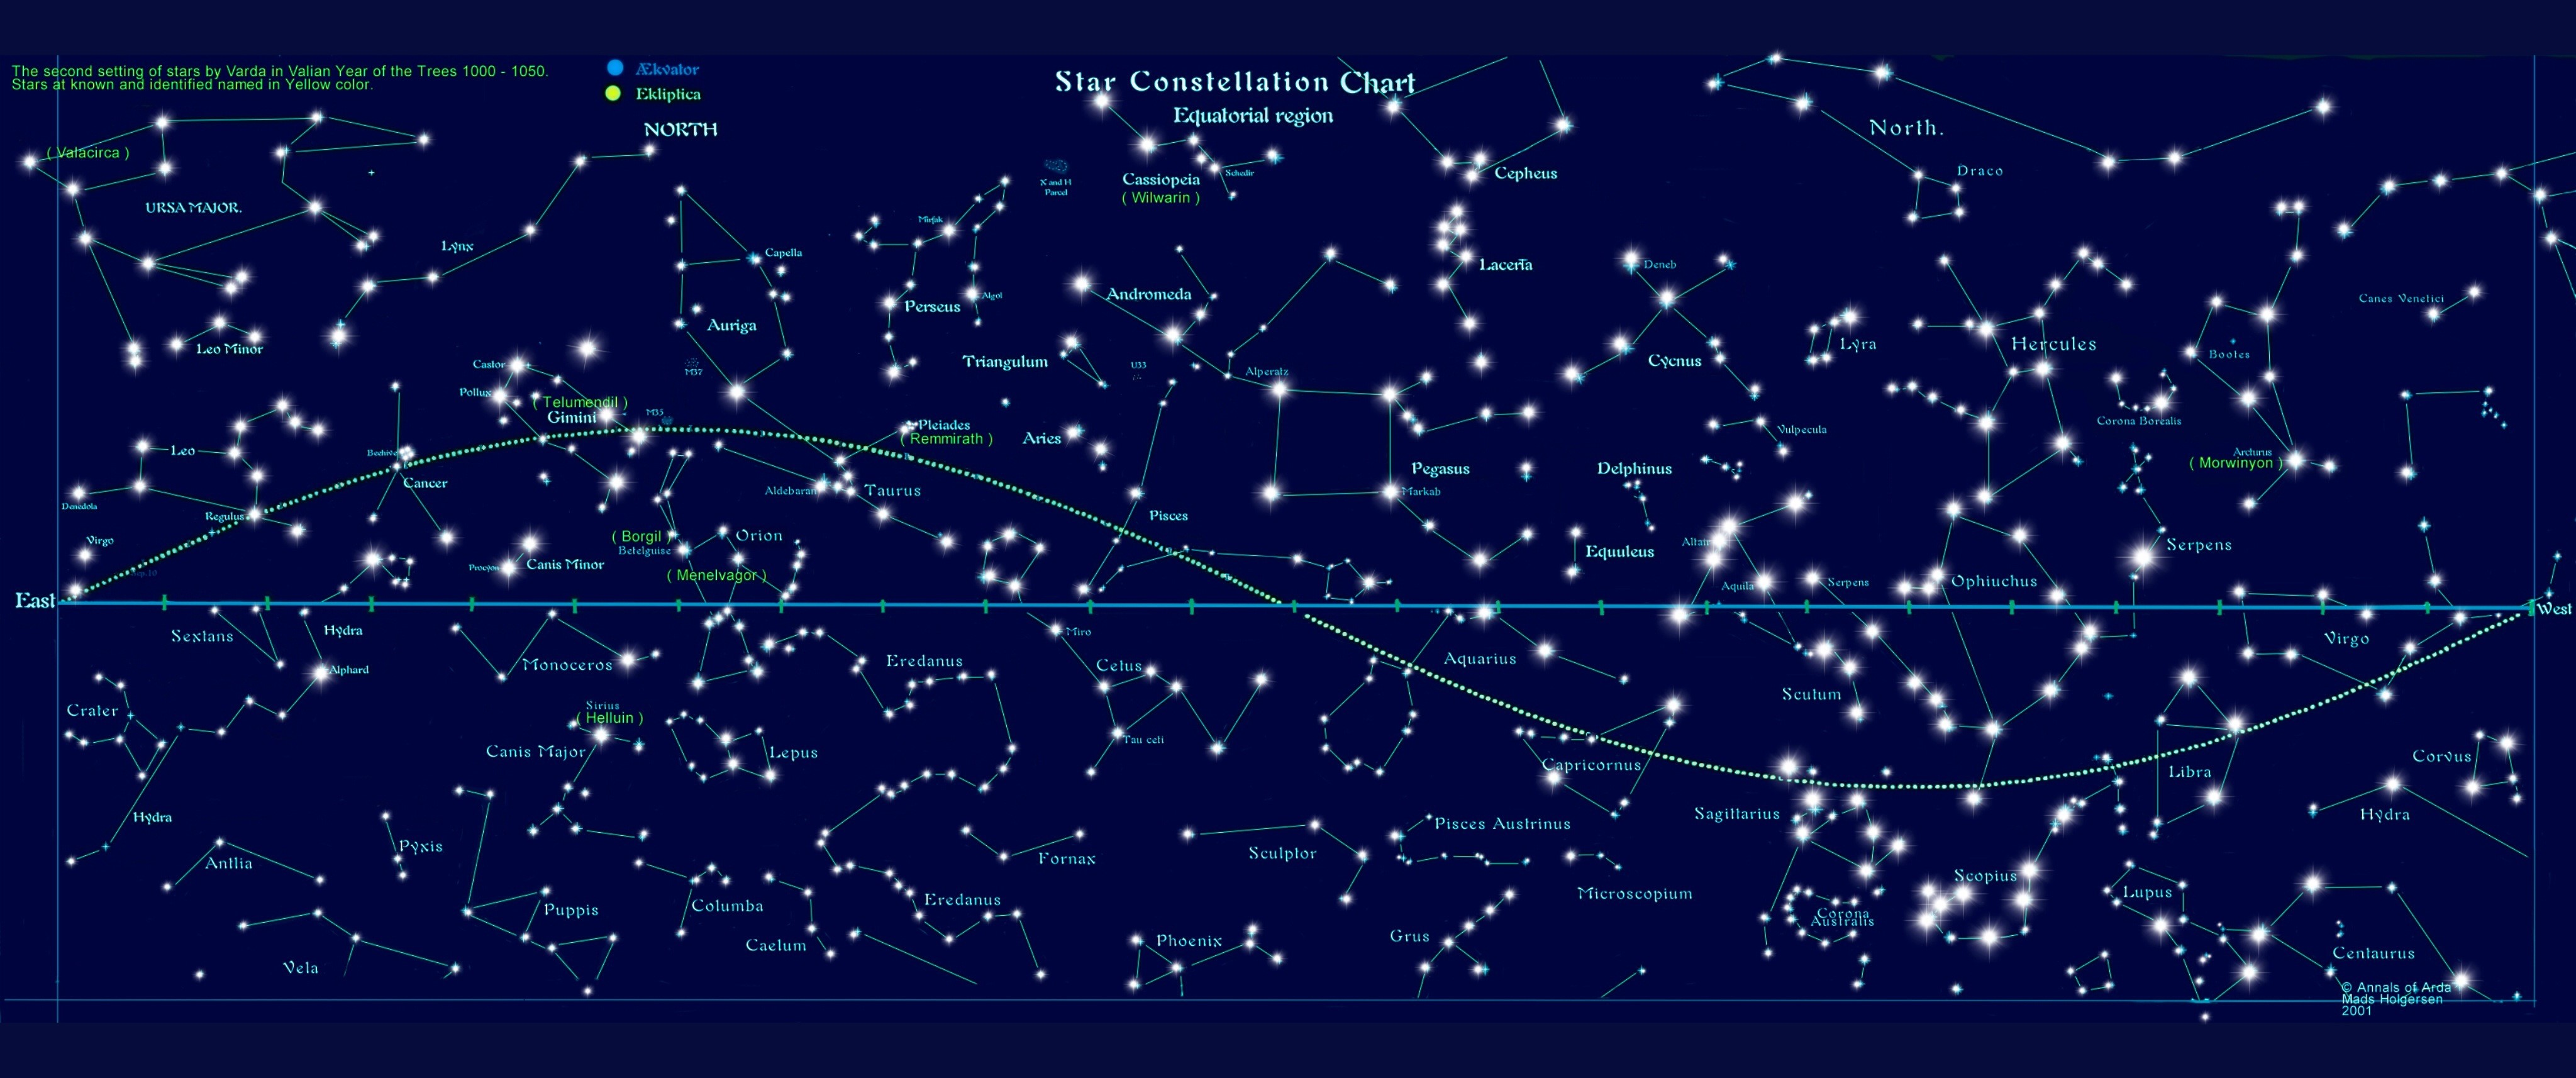 Term/Concept: constellation Image/Video/Audio: Image/Video/Audio Source: Sullivan, R. (2017, June 12). Constellations map. flickr. https://www.flickr.com/photos/47430793@N08/35249283965